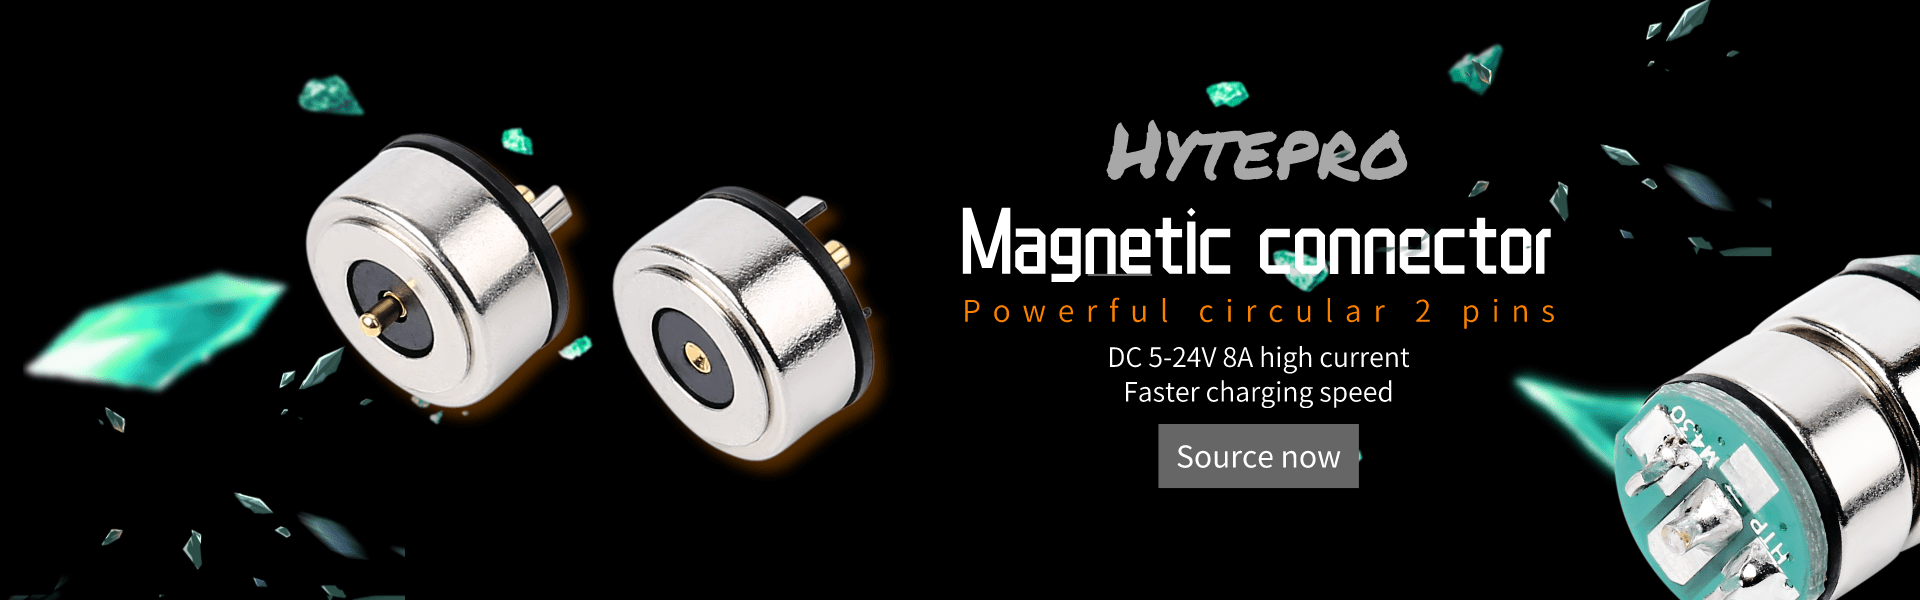 HytePro magnetic connector